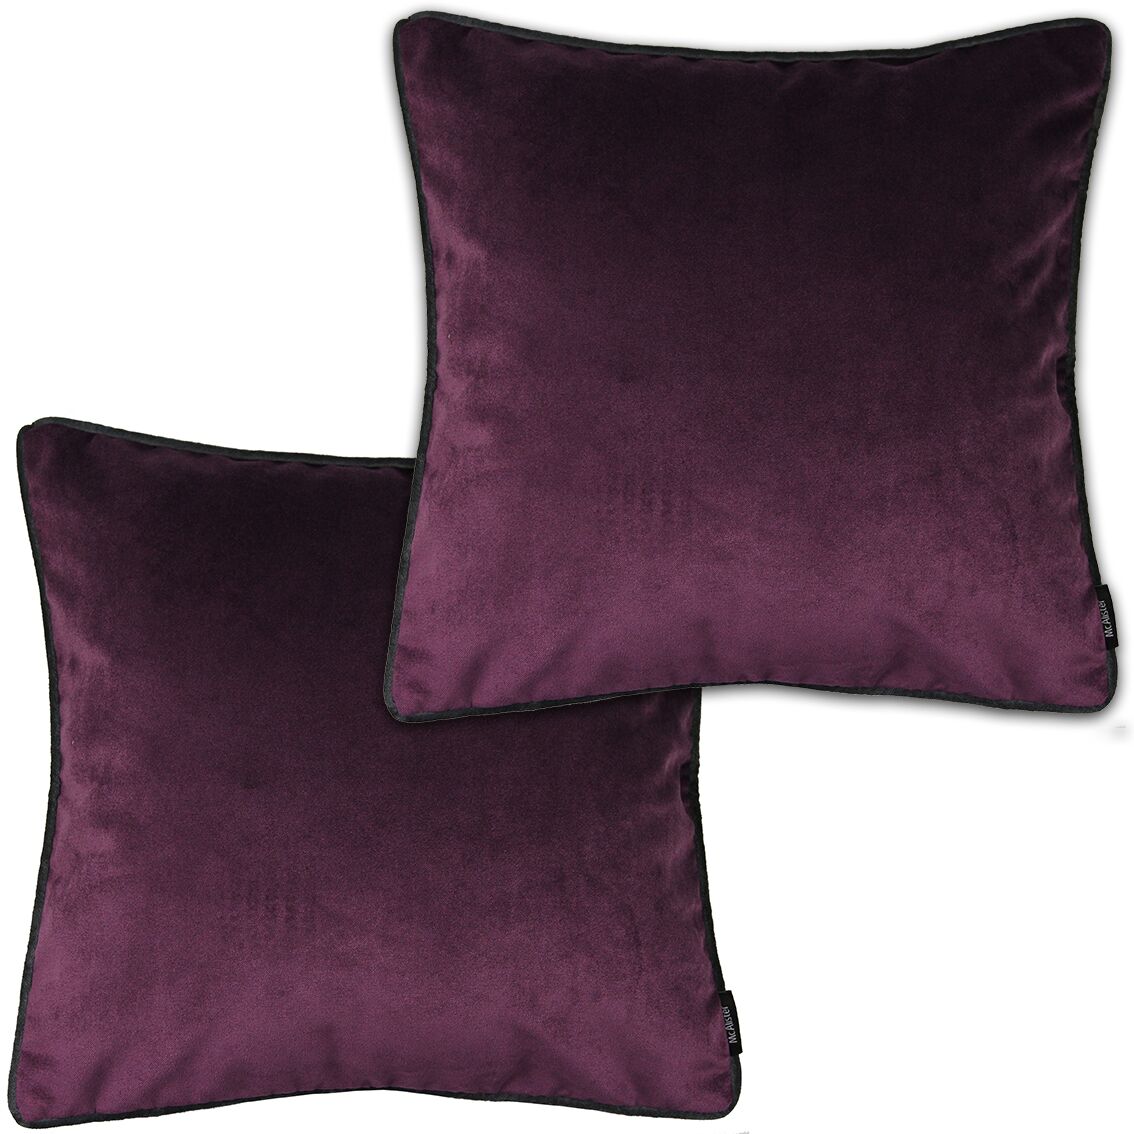 McAlister Textiles Matt Aubergine Purple Velvet 43cm x 43cm Piped Cushion Sets Cushions and Covers Cushion Covers Set of 2 